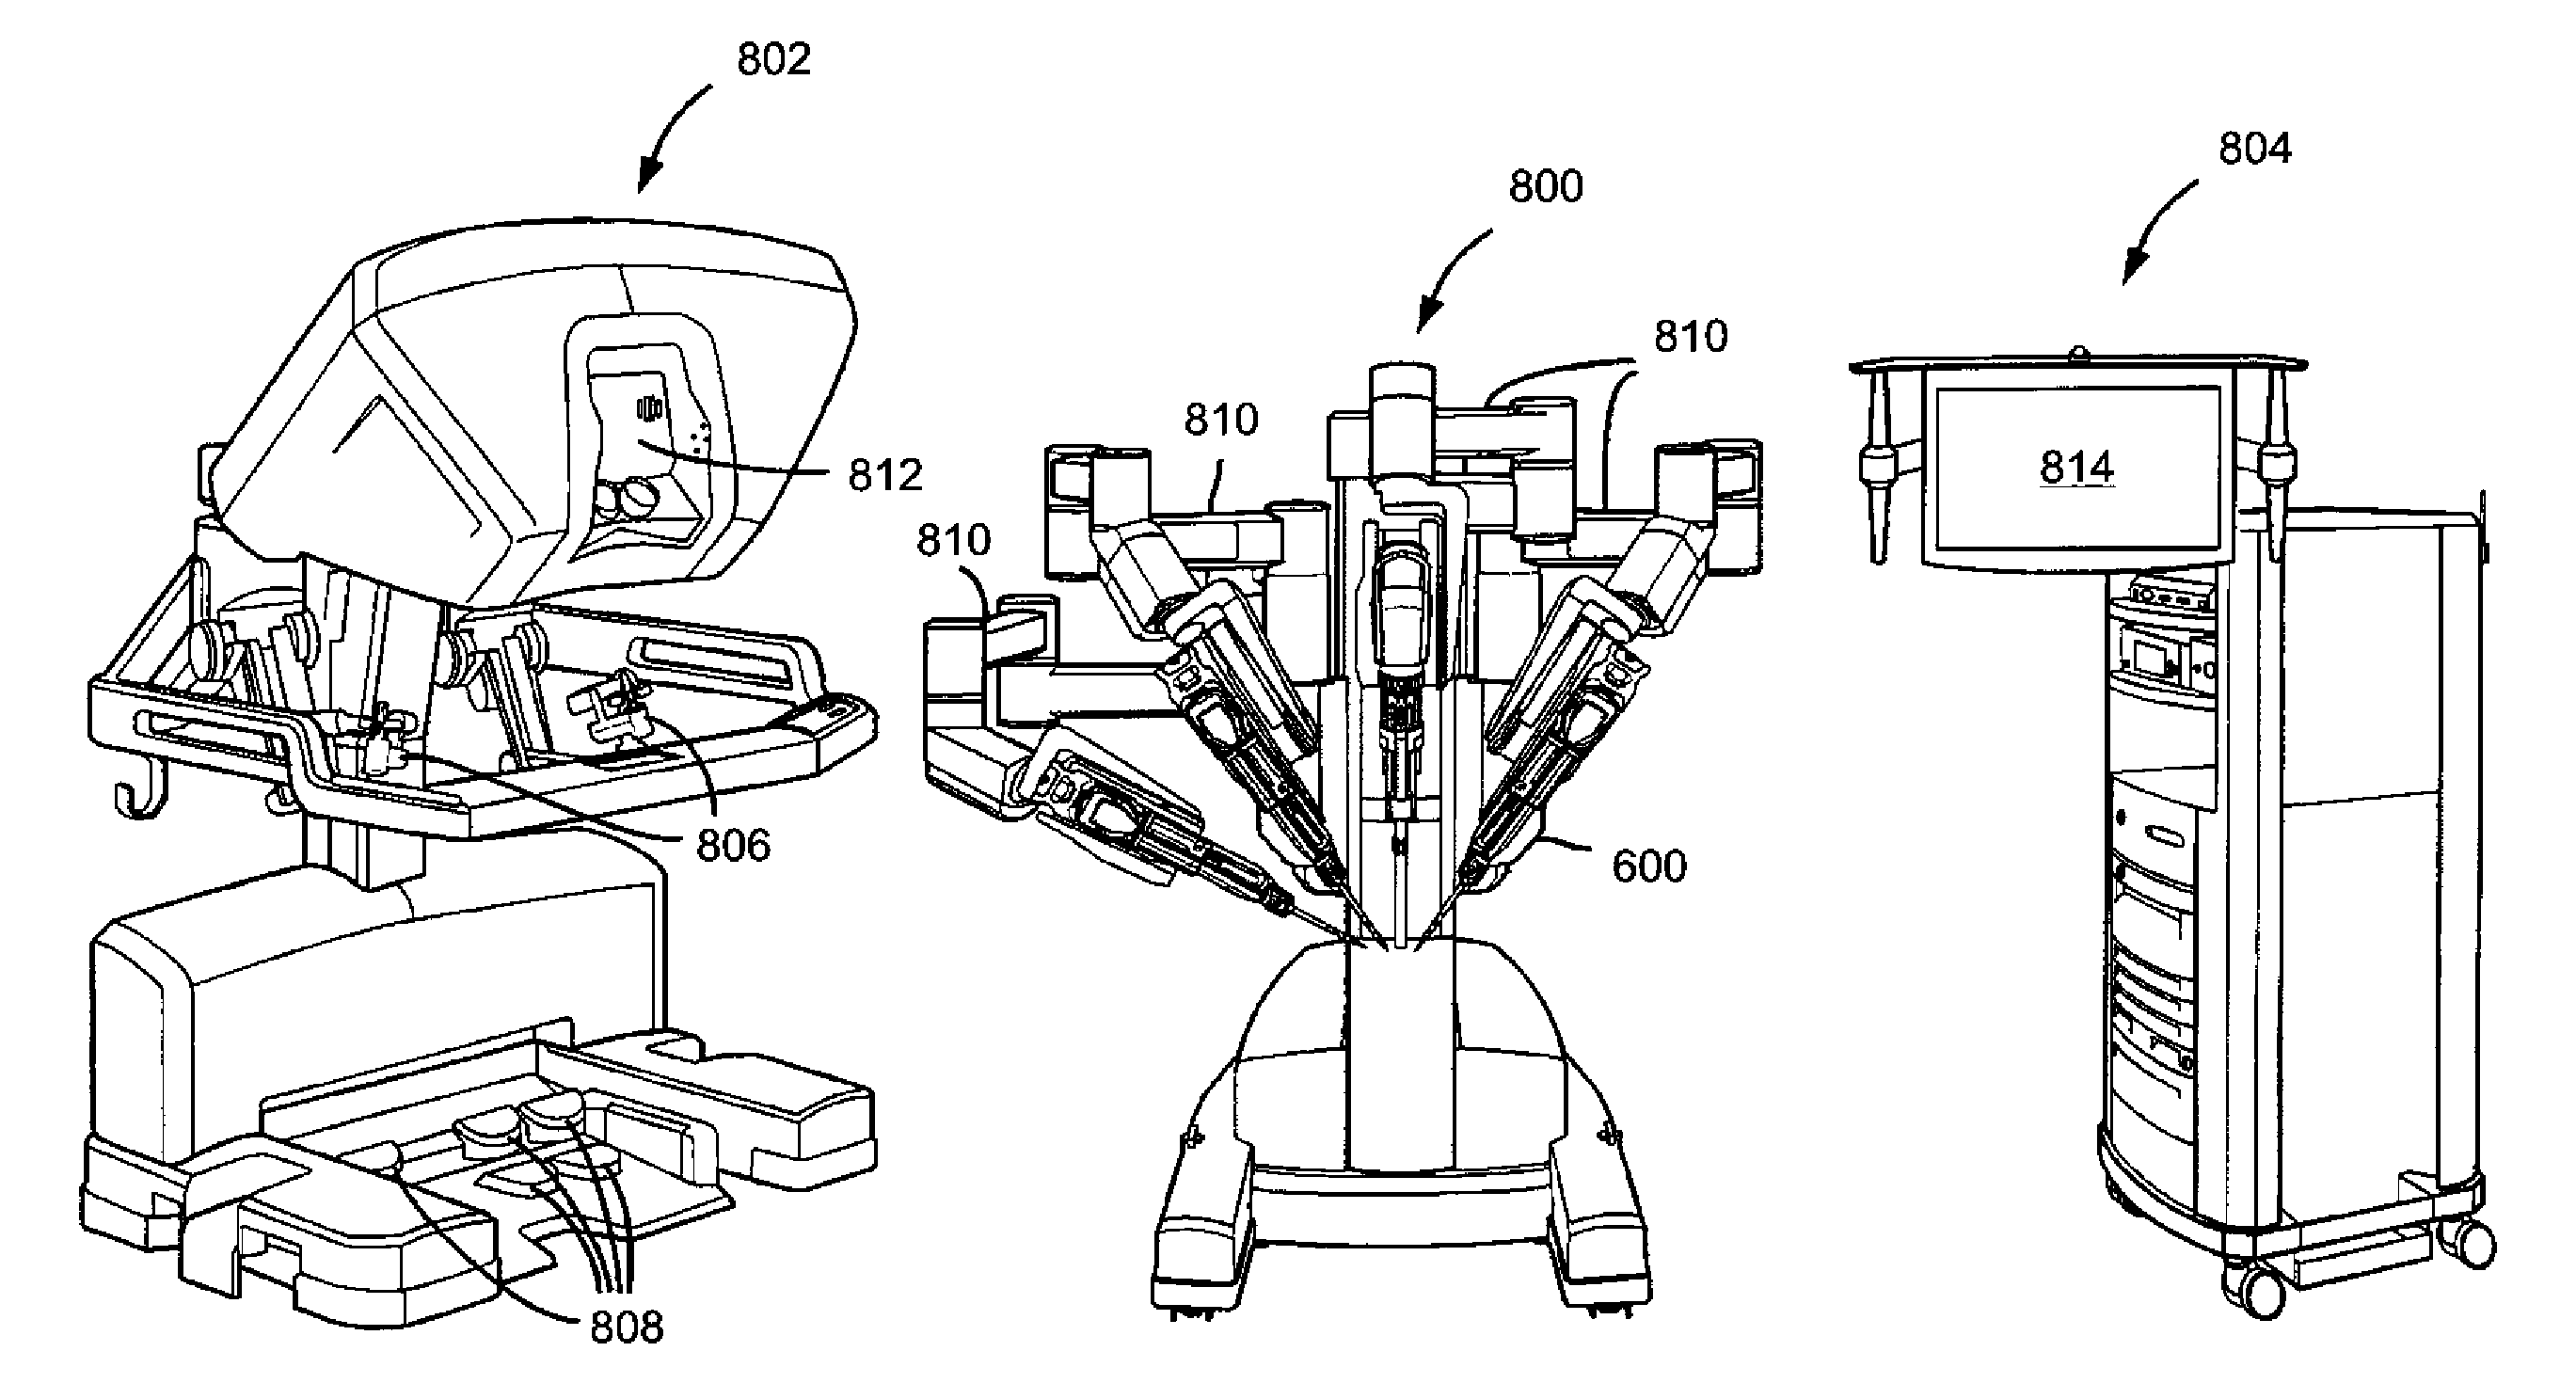 Grip force control for robotic surgical instrument end effector